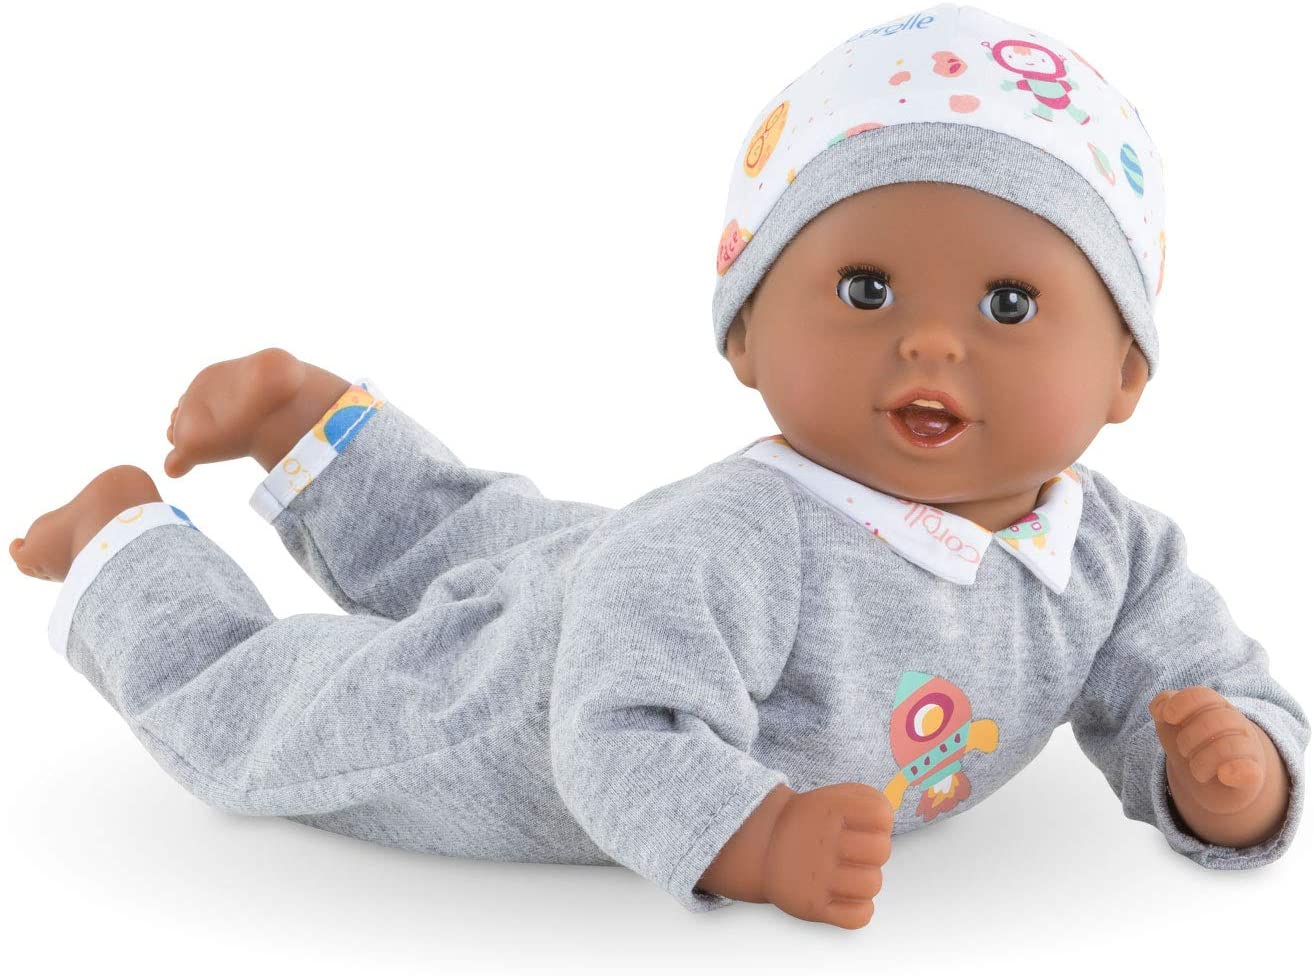 Corolle Mon Premier Poupon Bebe Calin Marius - 12” Boy Baby Doll, Poseable Soft Body with Vanilla Scent and Sleepy Eyes That Open and Close, for Kids Ages 18 Months and Up, Gray